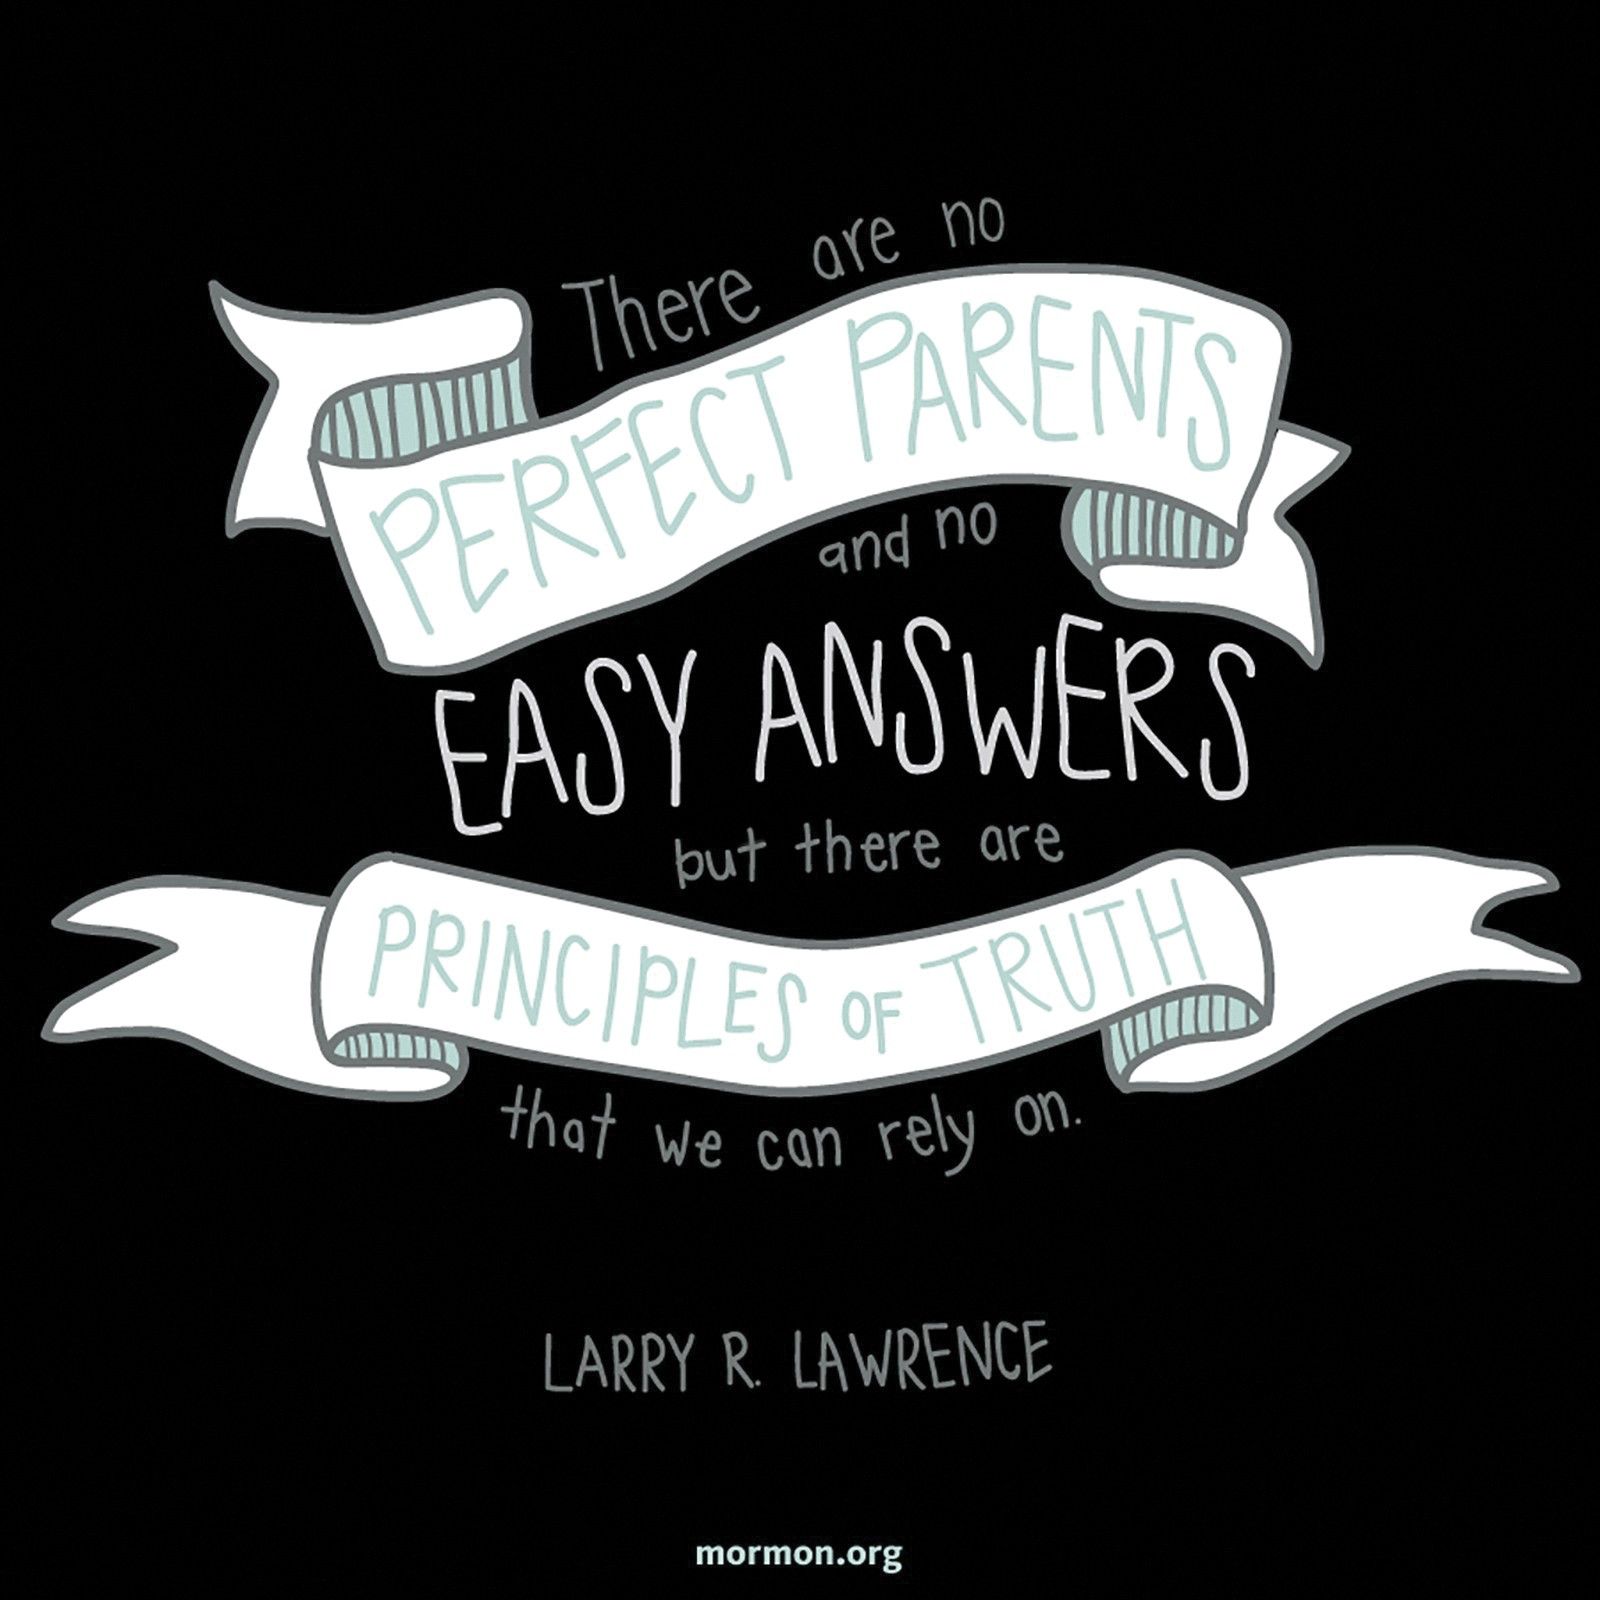 “There are no perfect parents and no easy answers, but there are principles of truth that we can rely on.”—Elder Larry R. Lawrence, “Courageous Parenting”